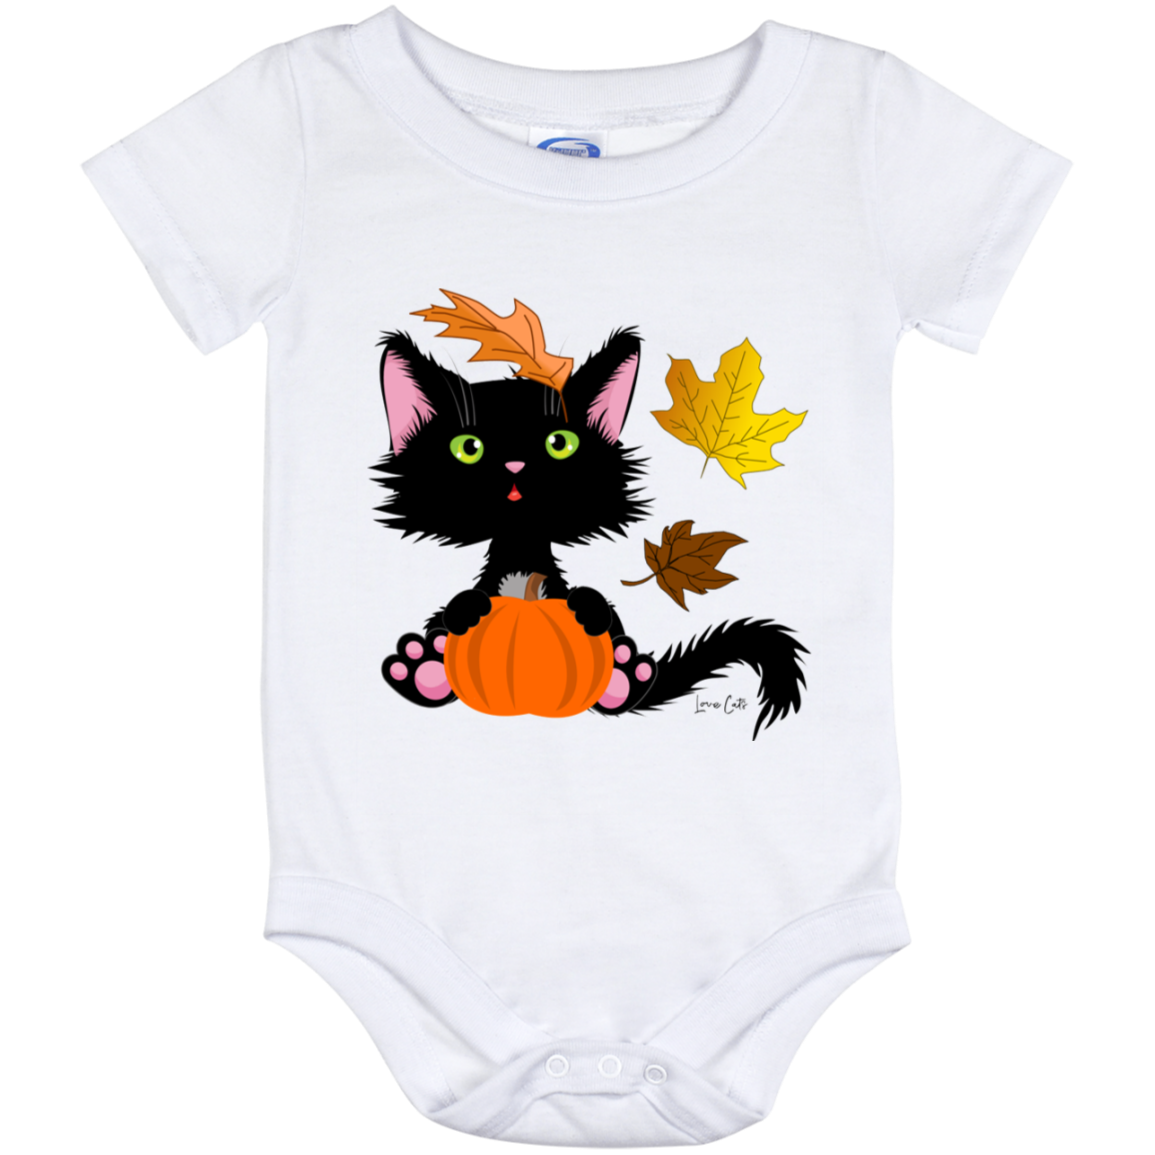 Lucky the Black Cat with Pumpkin Baby Onesies